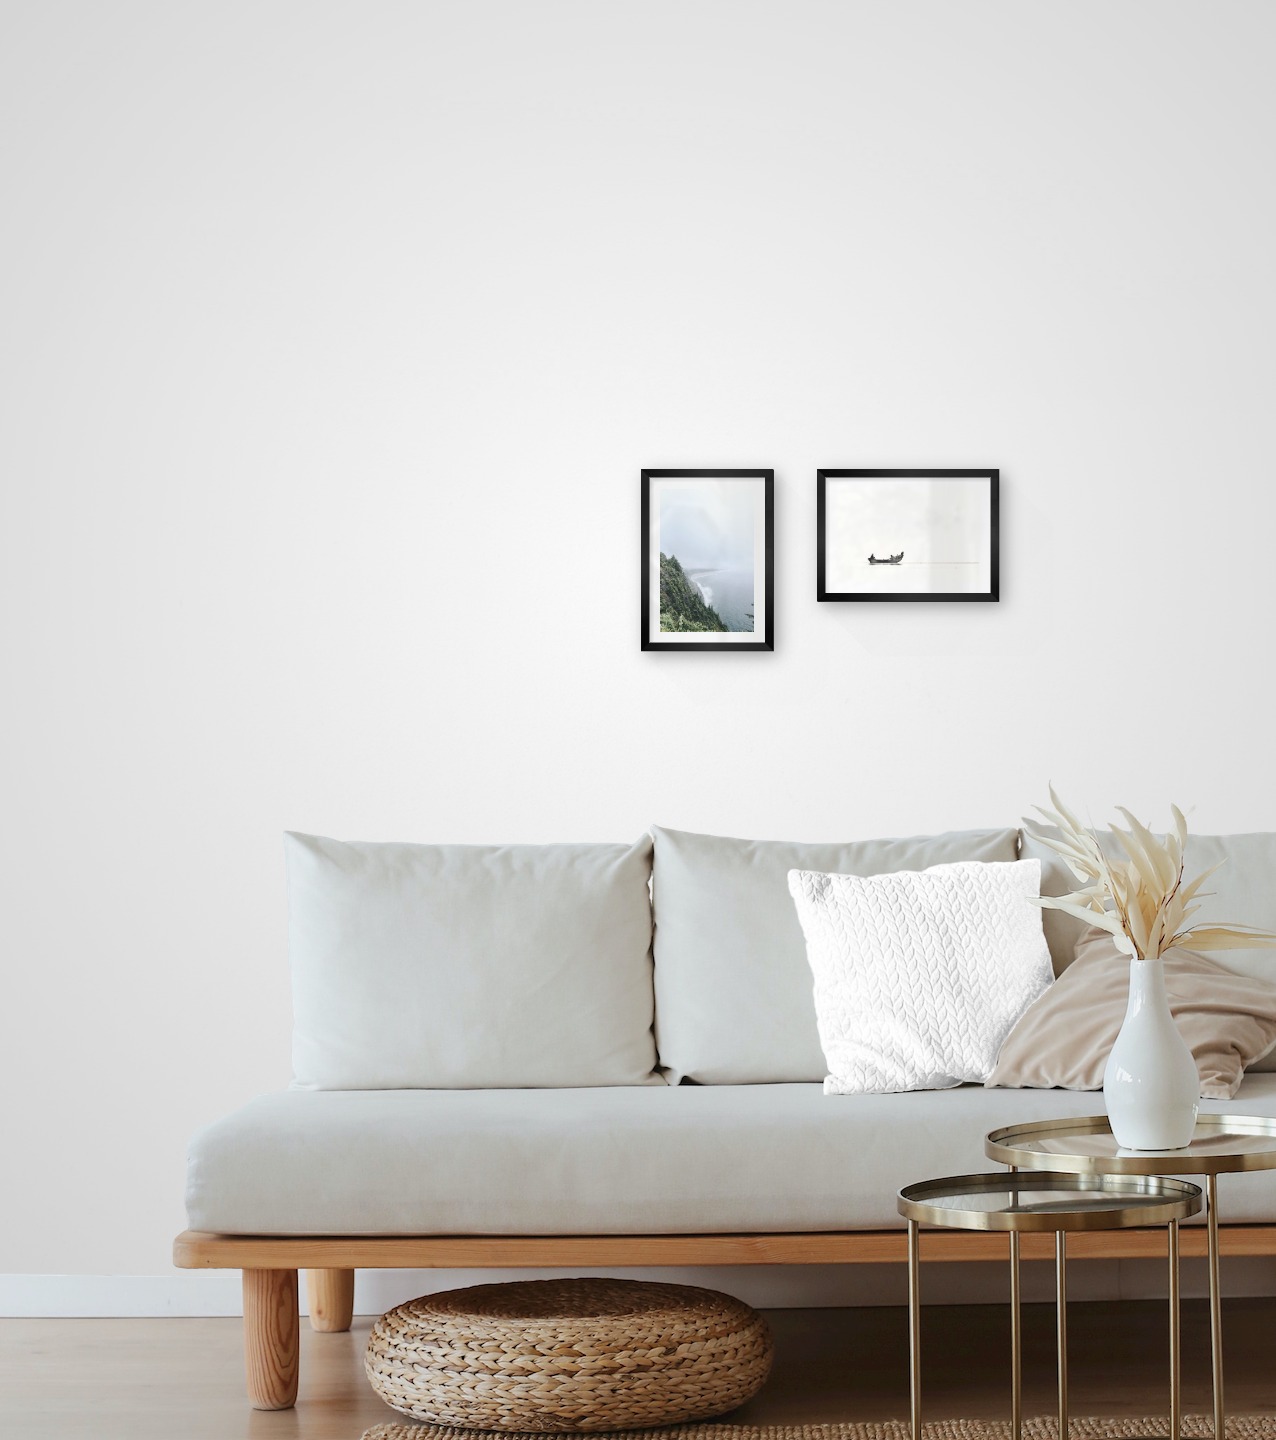 Gallery wall with picture frames in black in sizes 21x30 with prints "Rocks facing the water" and "People in boat"